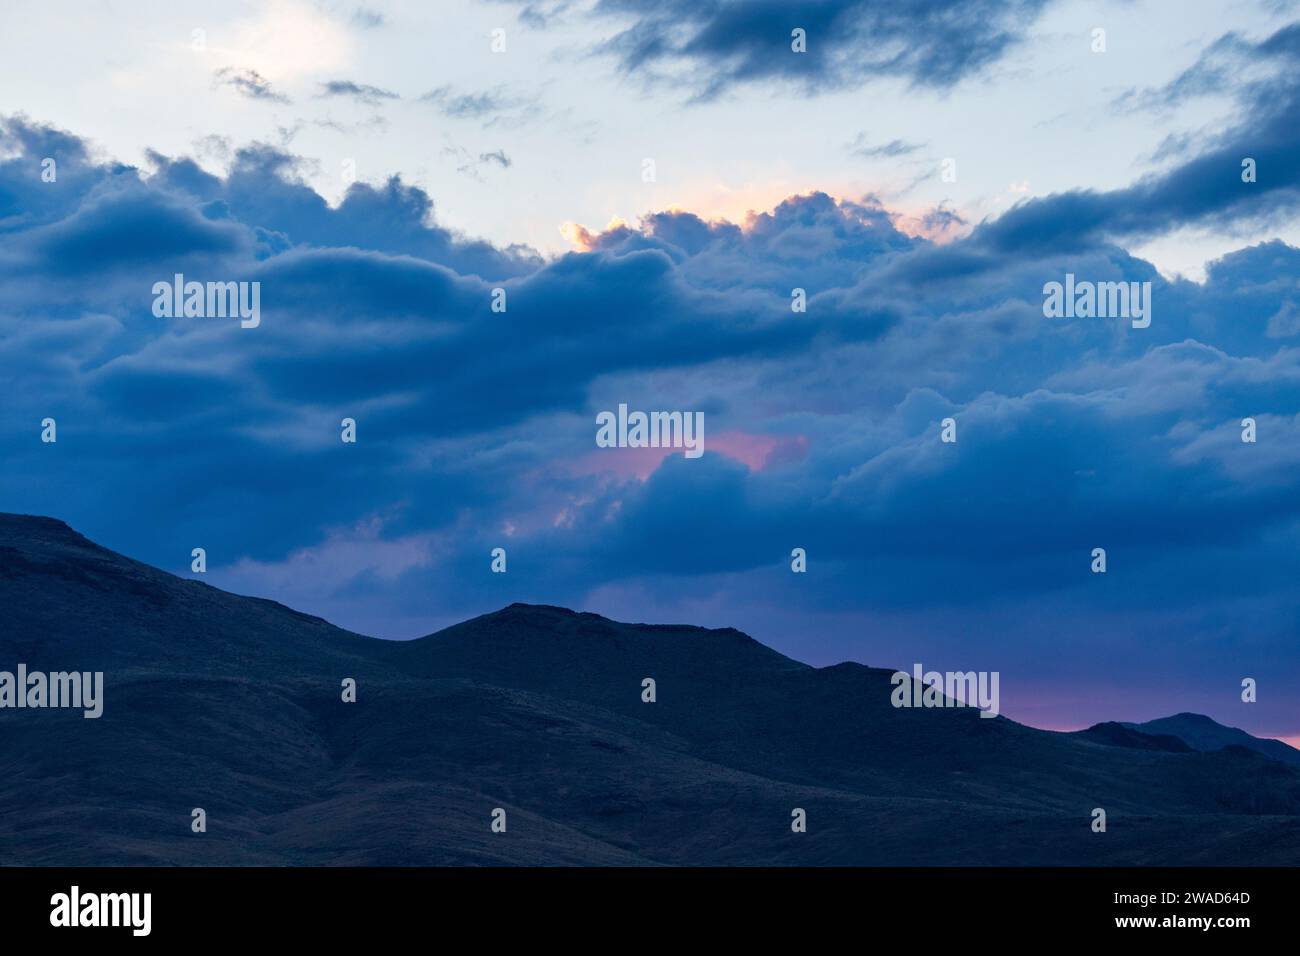 Beautiful dawn over silhouettes of mountains Stock Photo